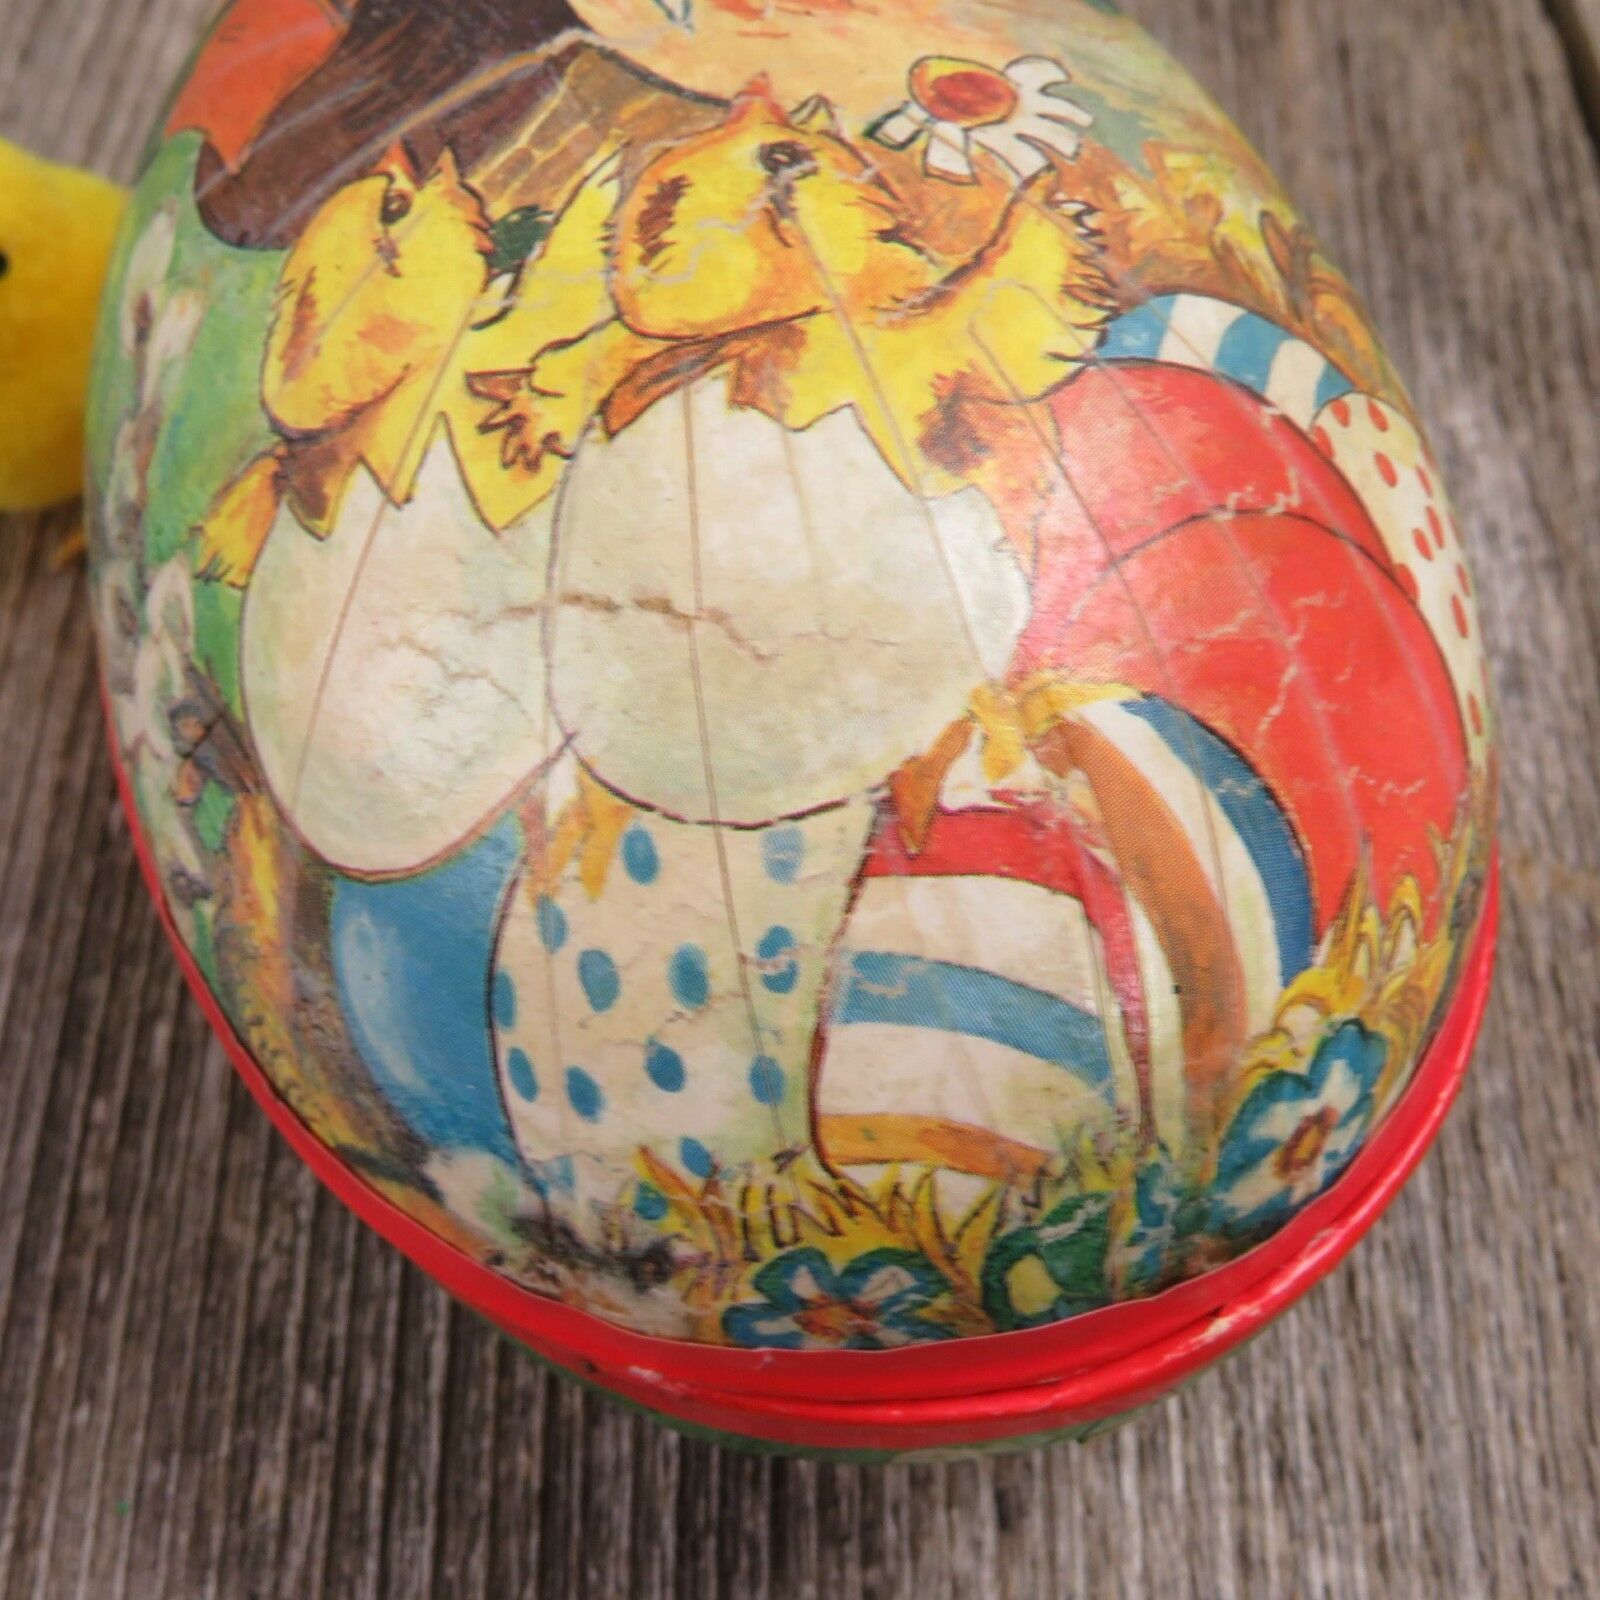 Vintage Easter Egg Paper Mache Candy Holder Container with Chick Toy - At Grandma's Table